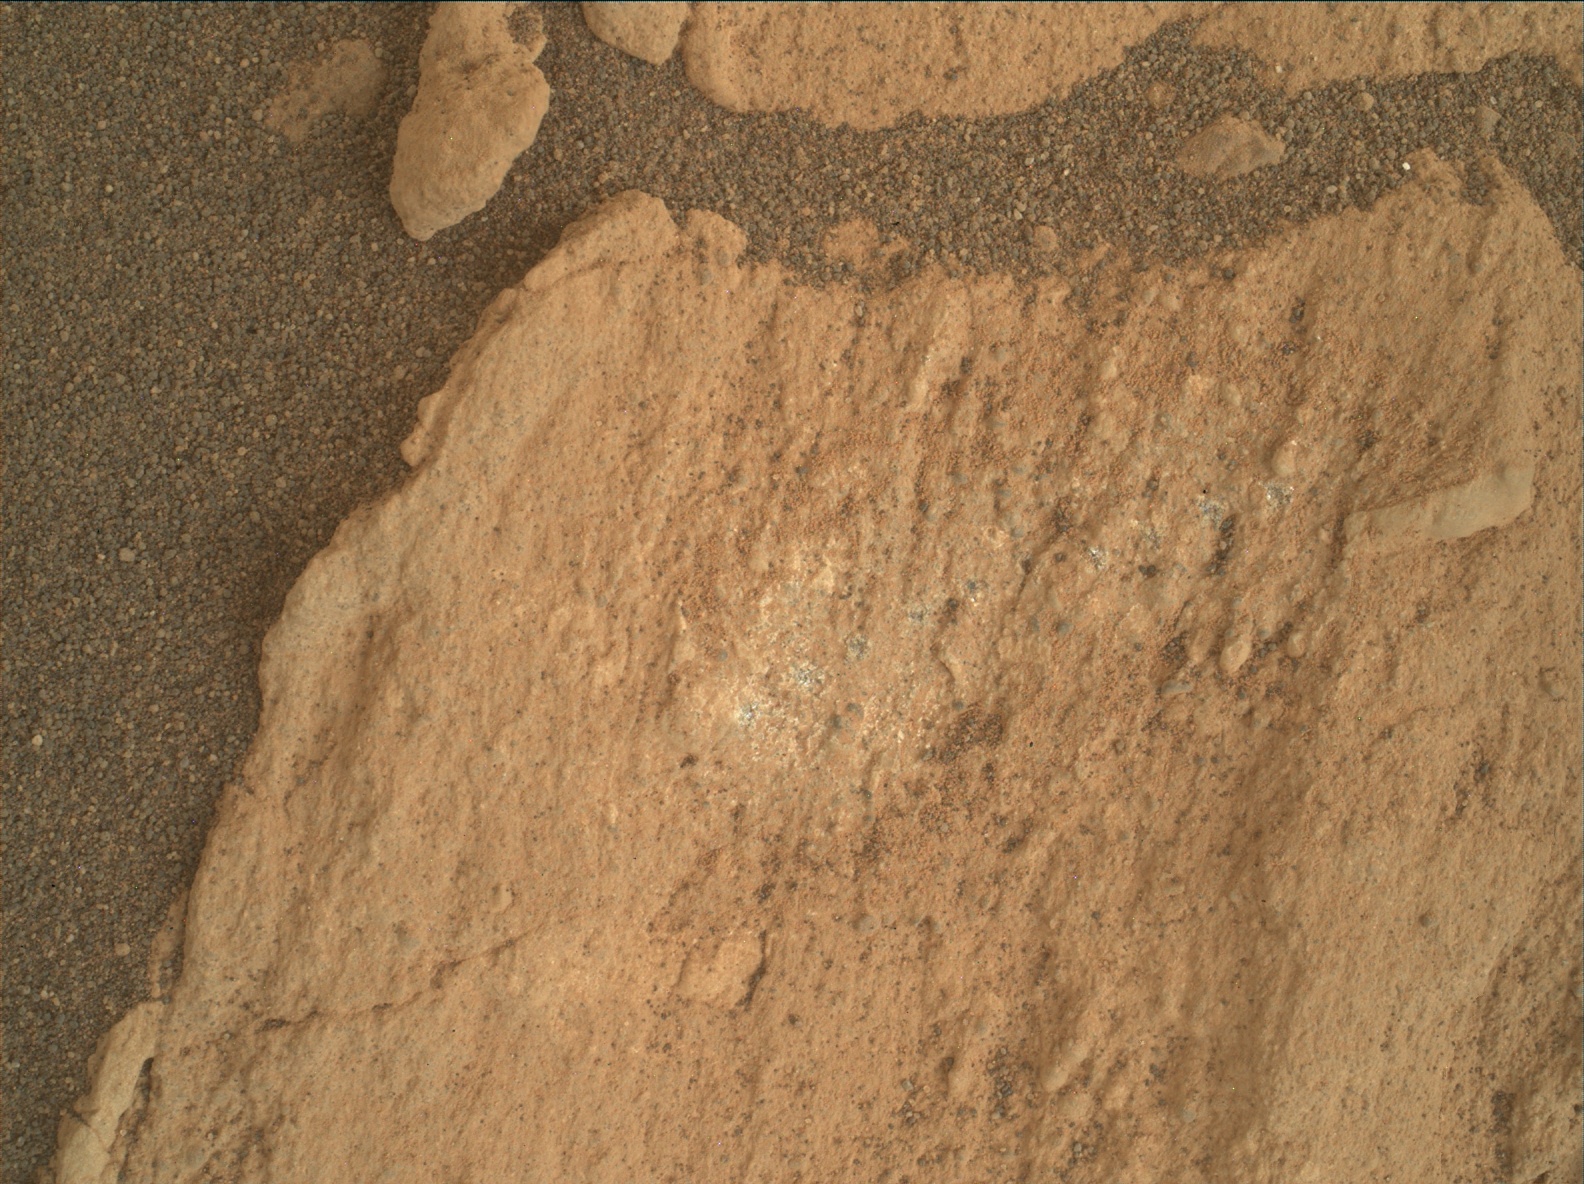 Nasa's Mars rover Curiosity acquired this image using its Mars Hand Lens Imager (MAHLI) on Sol 2695